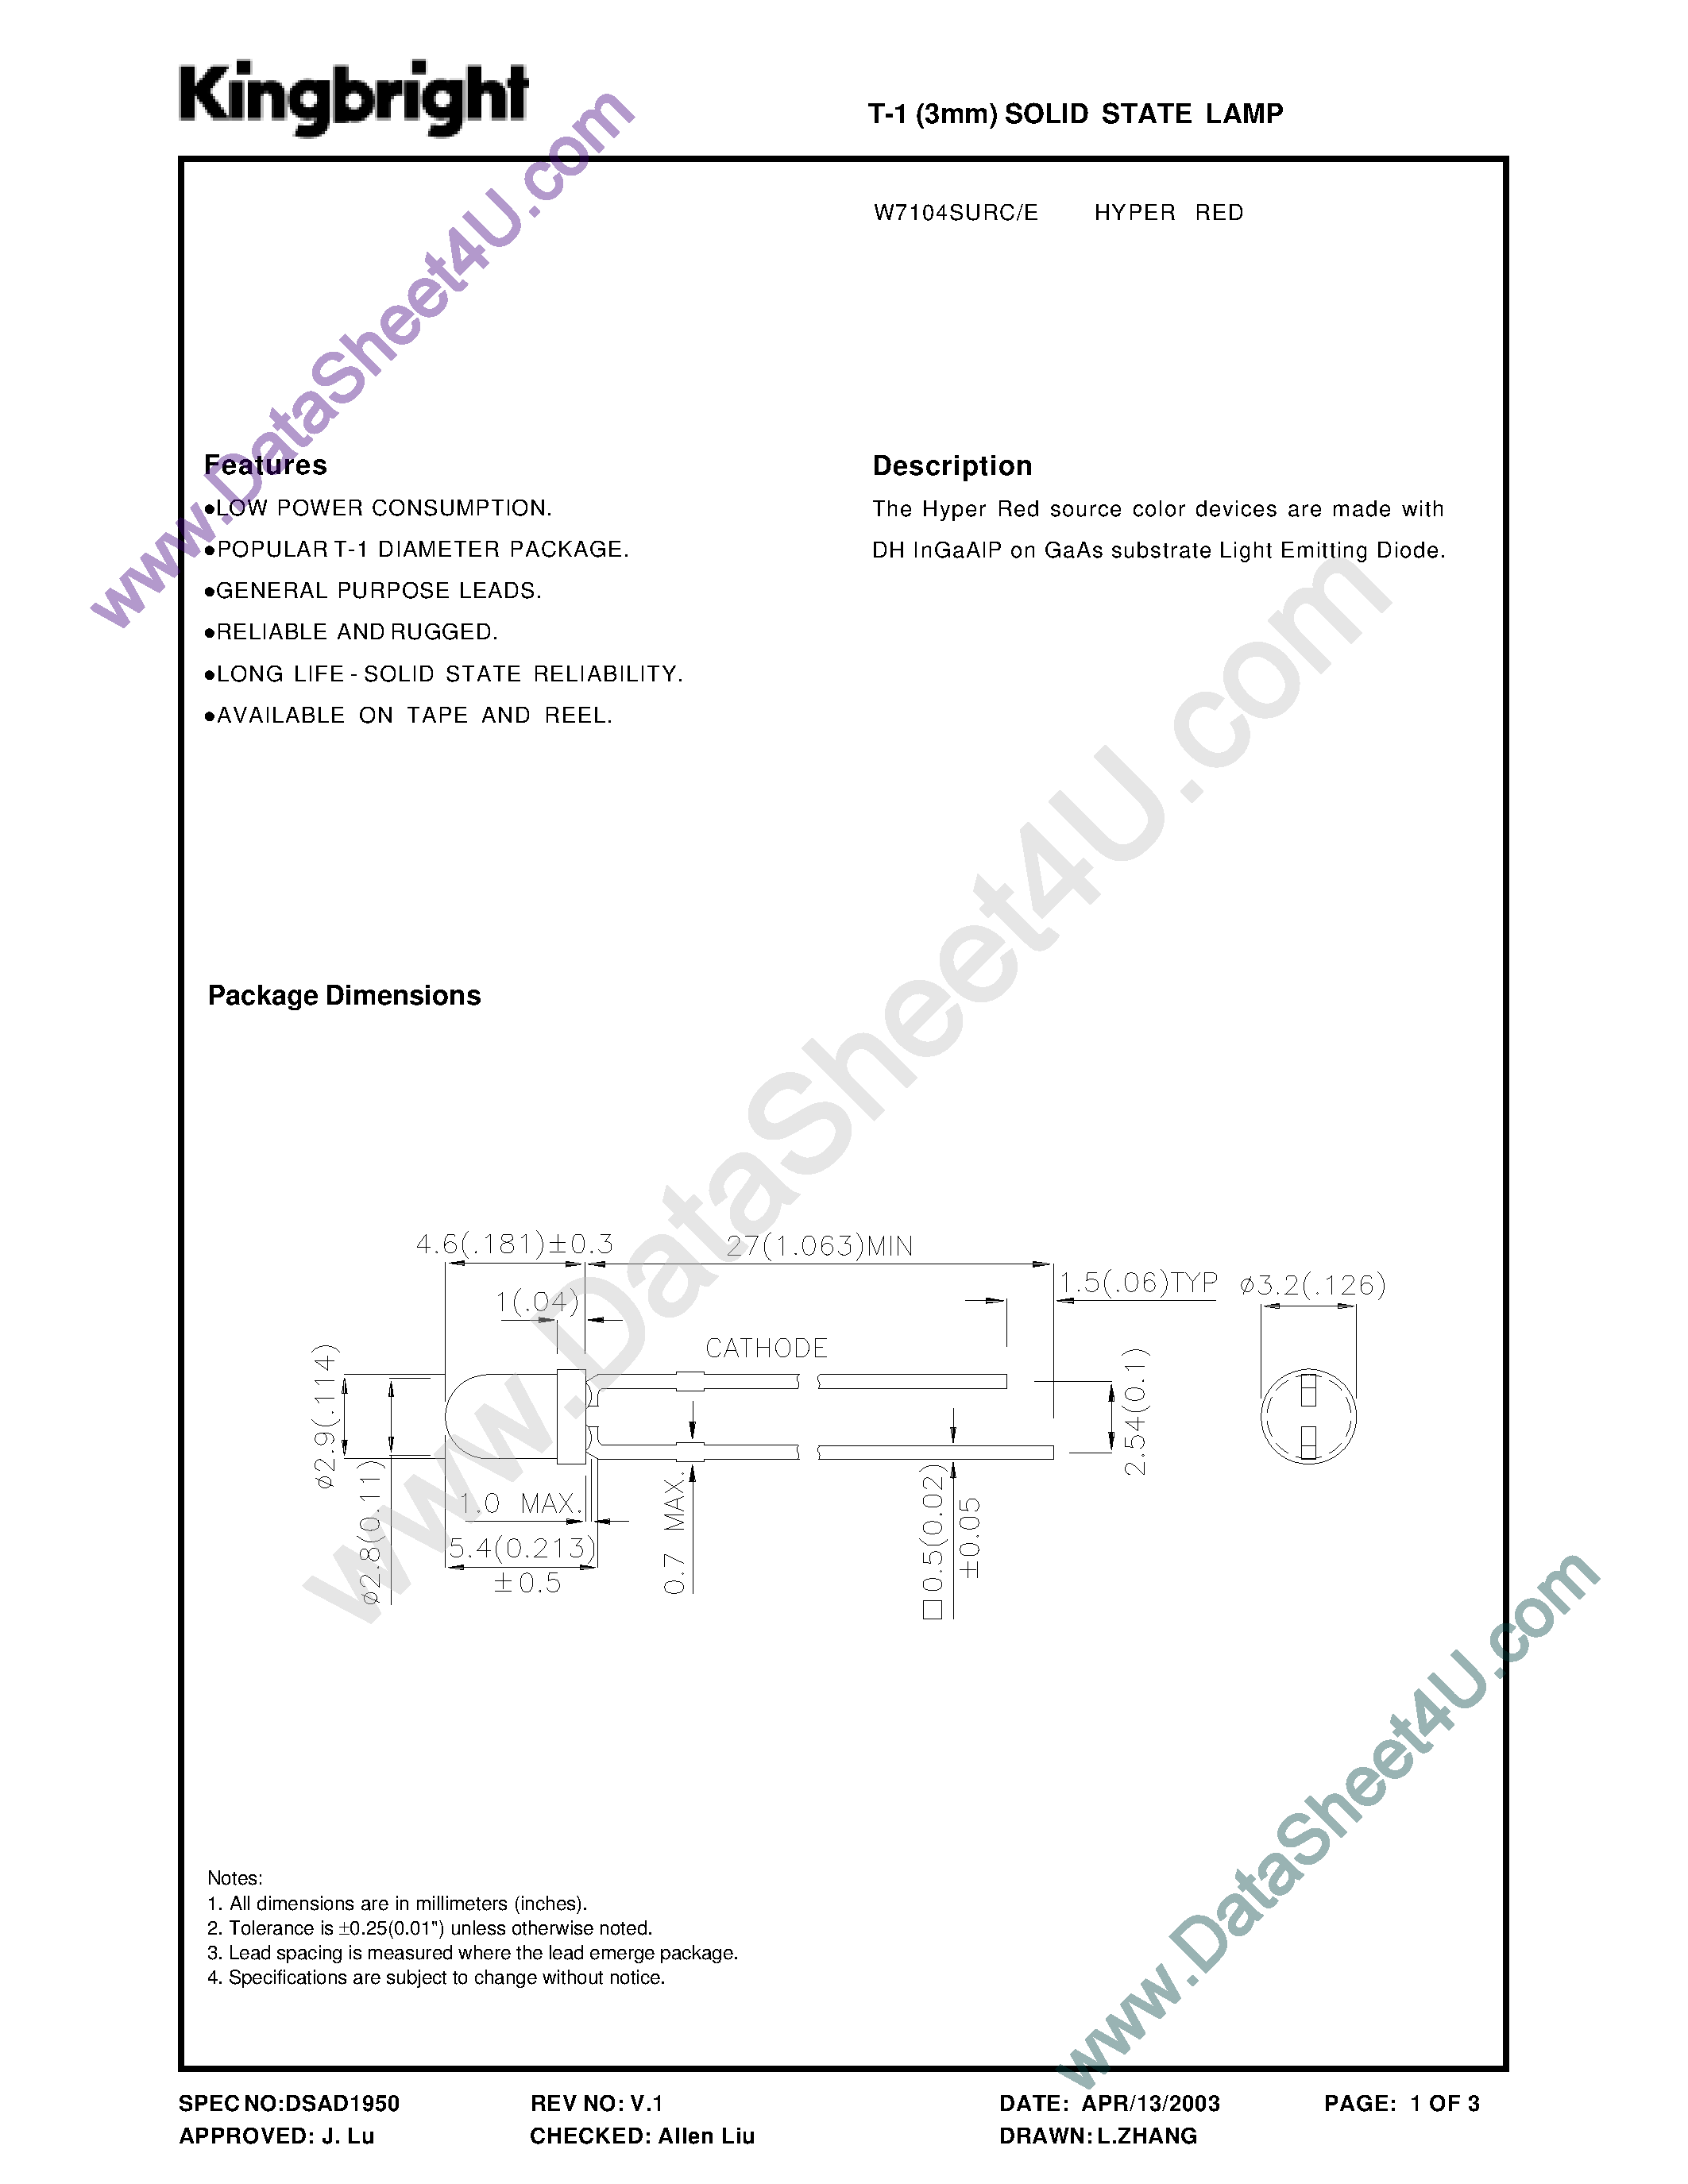 Datasheet W7104SURE - (W7104SURC/E) T-1 Solid State Lamp page 1